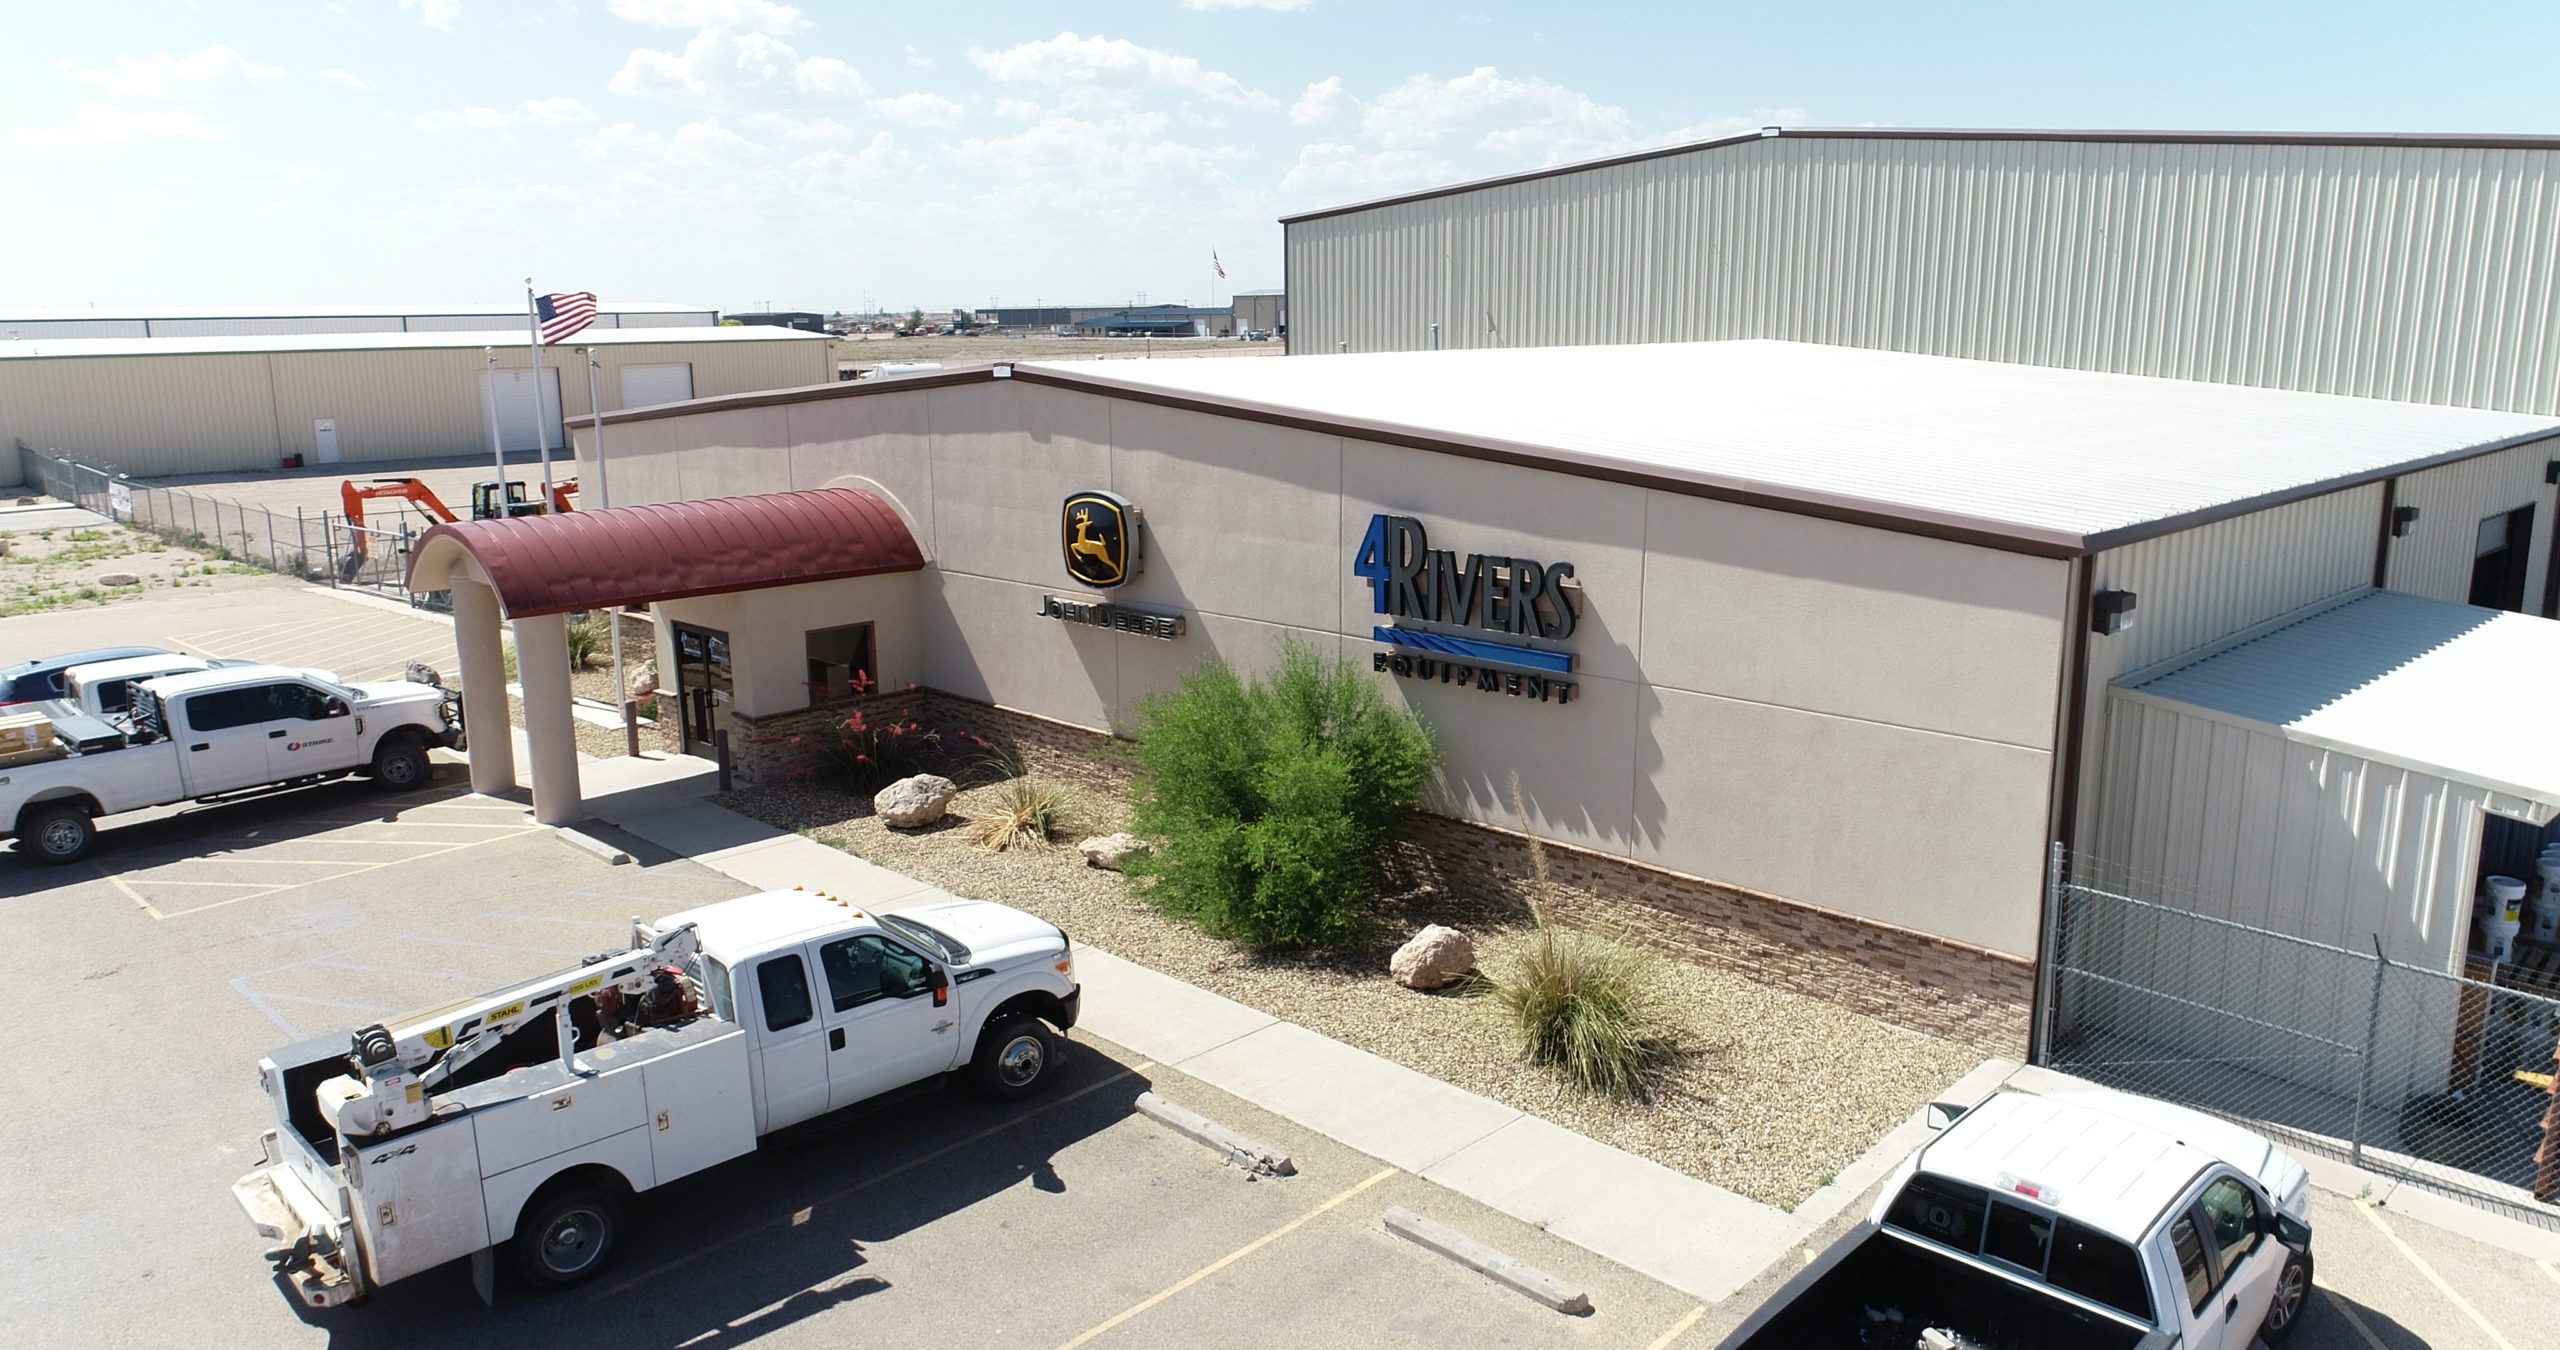 Our 4Rivers Equipment Hobbs location provides industry-leading John Deere equipment support and service.